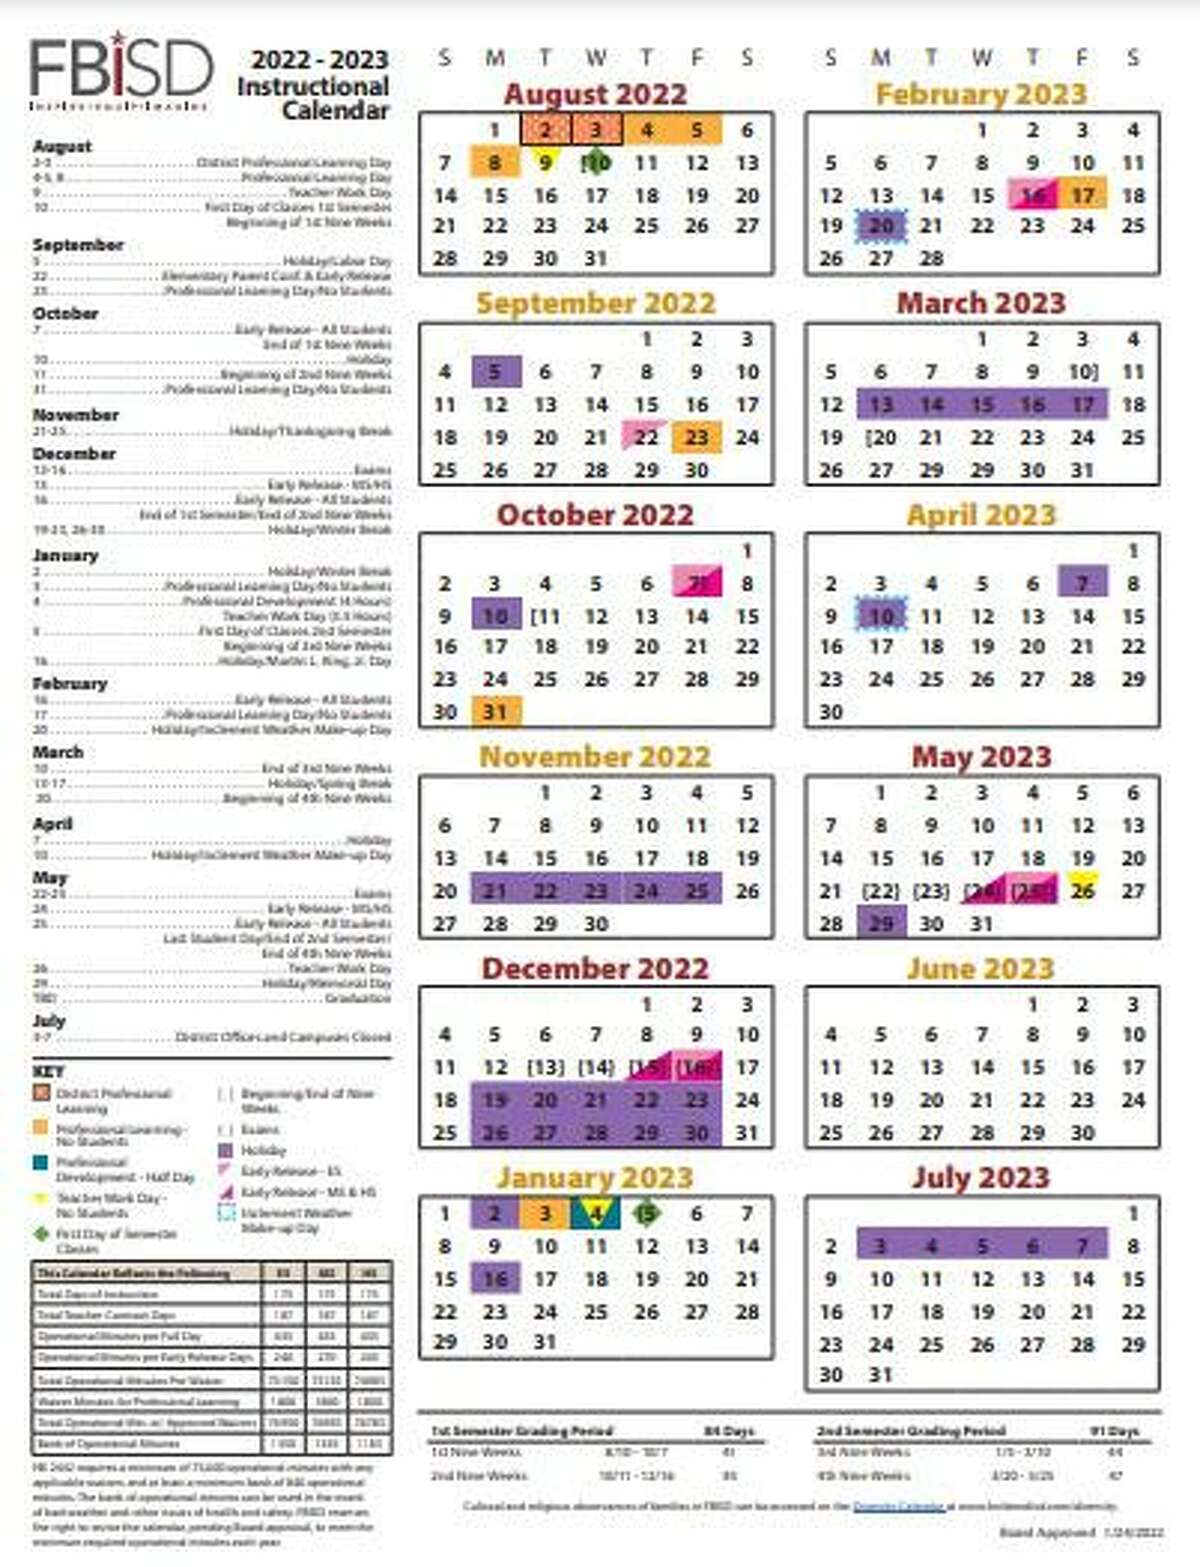 Fort Bend ISD 2022 23 Instructional Calendar Approved And Viewable